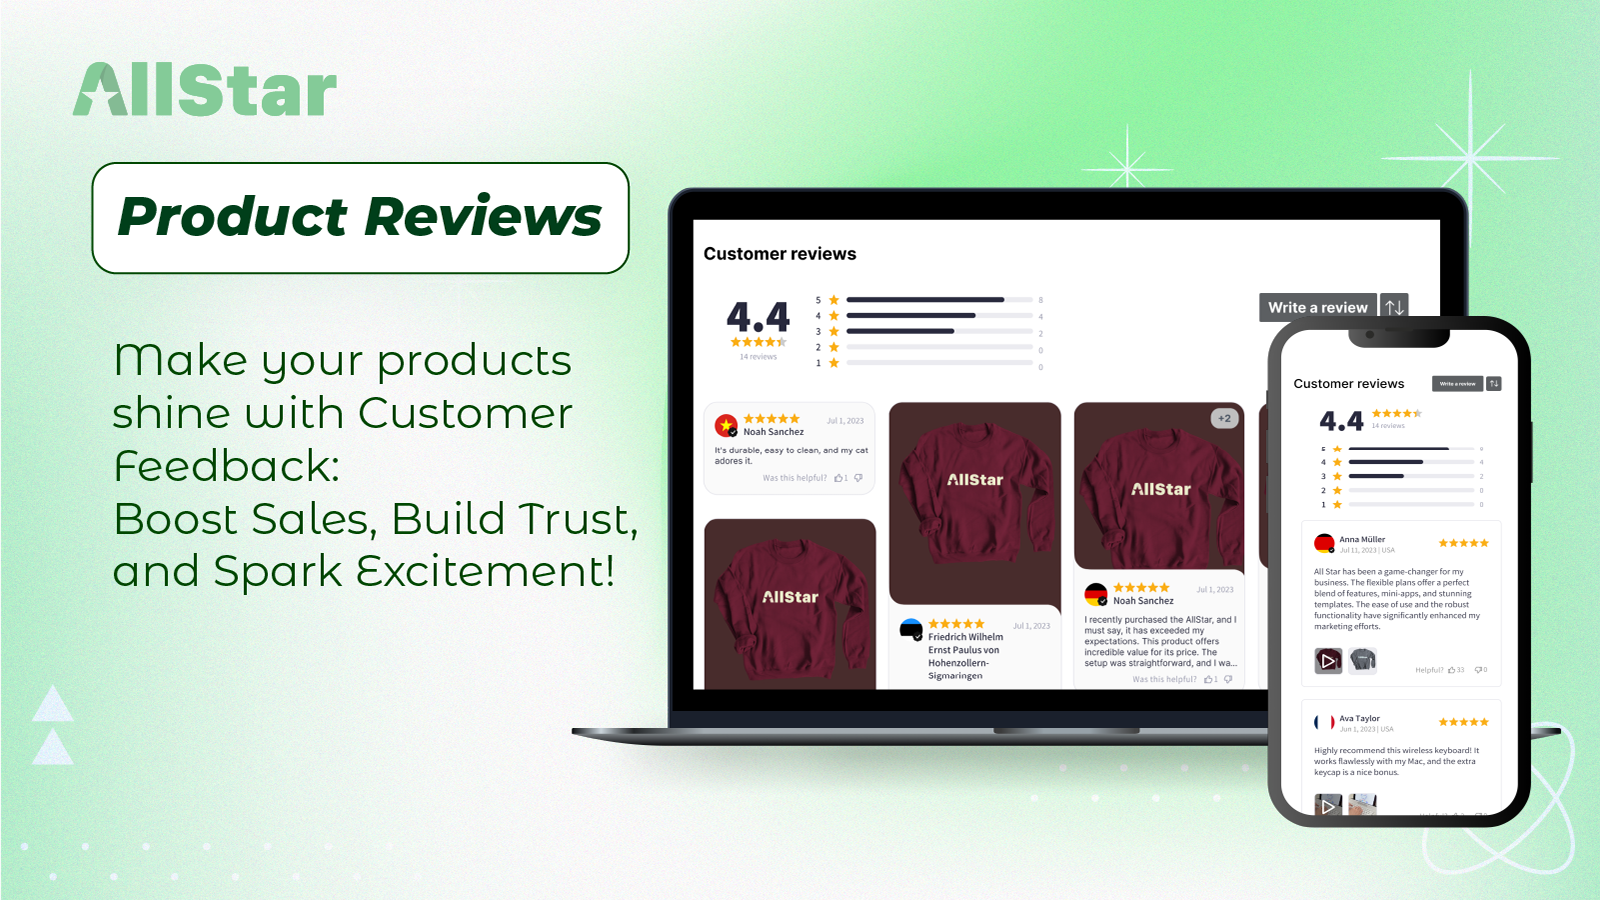 Product Reviews helps boost sales, build trust